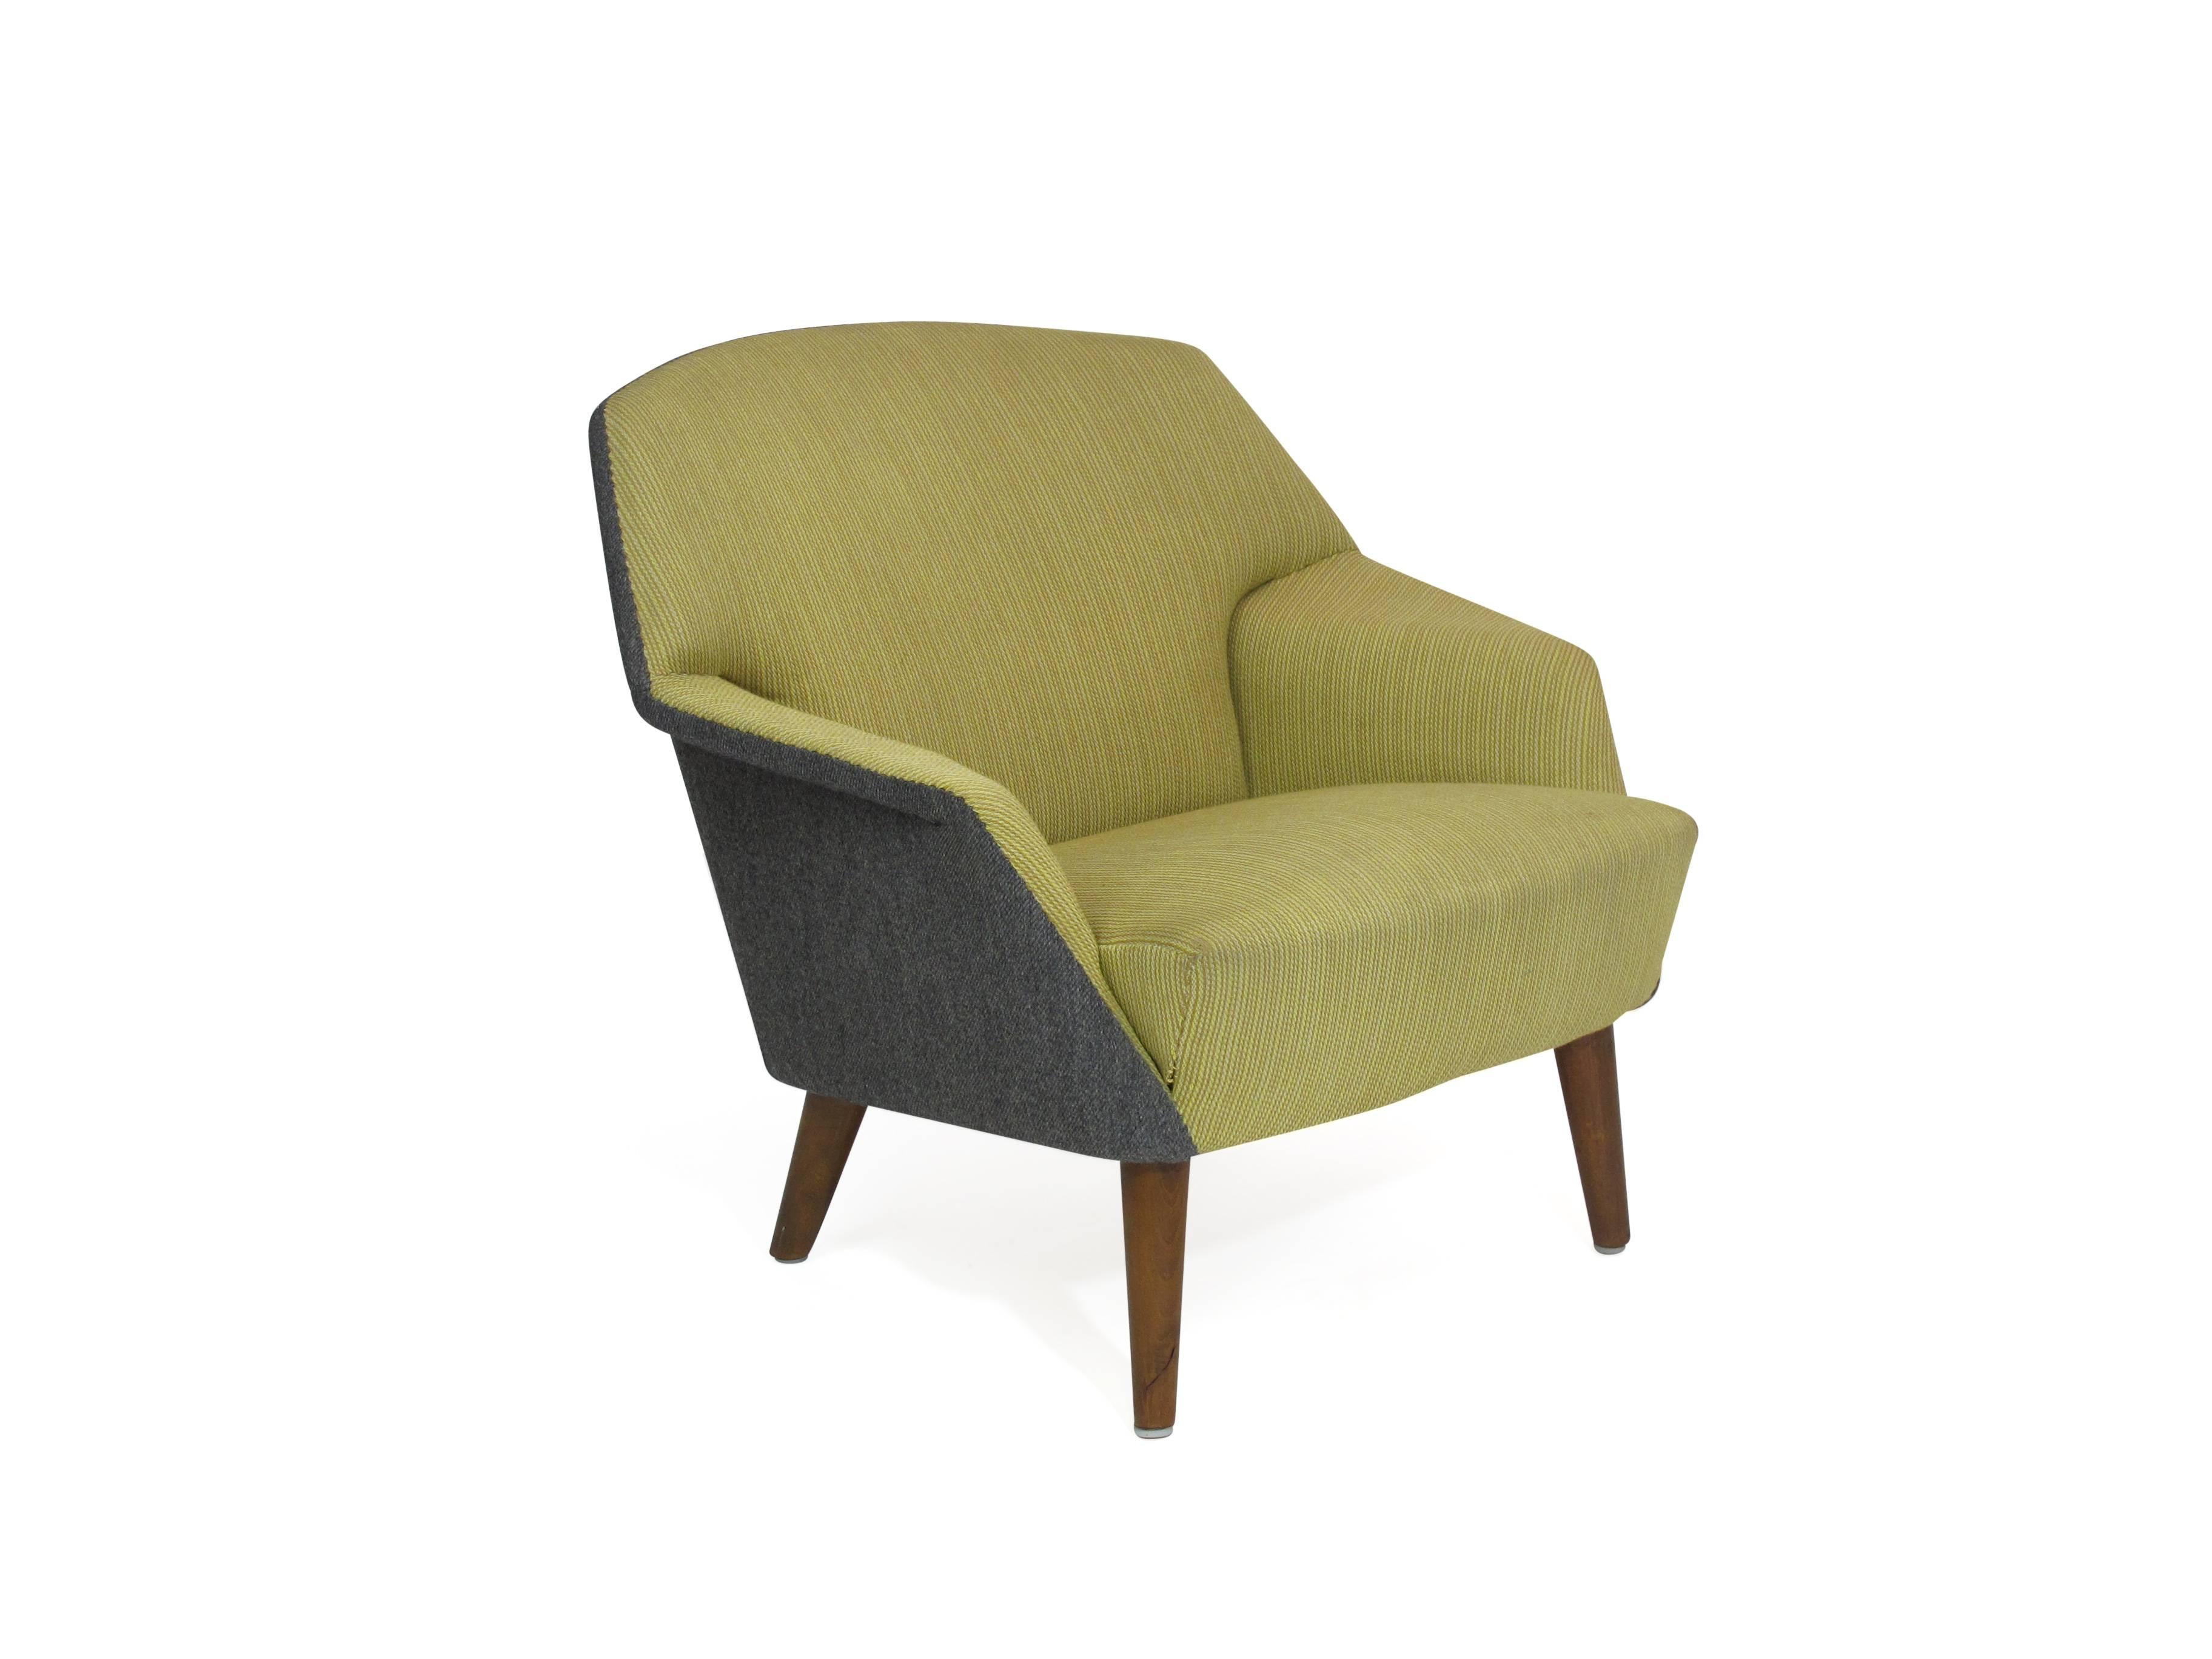 Danish midcentury lounge chair designed by Aksel Bender Madsen & Ejner Larsen; manufactured by Willy Beck.
Solid wood frame with inner spring seat, upholstered in the original vintage wool textile, raised on tapered solid beech legs.
Upholstery